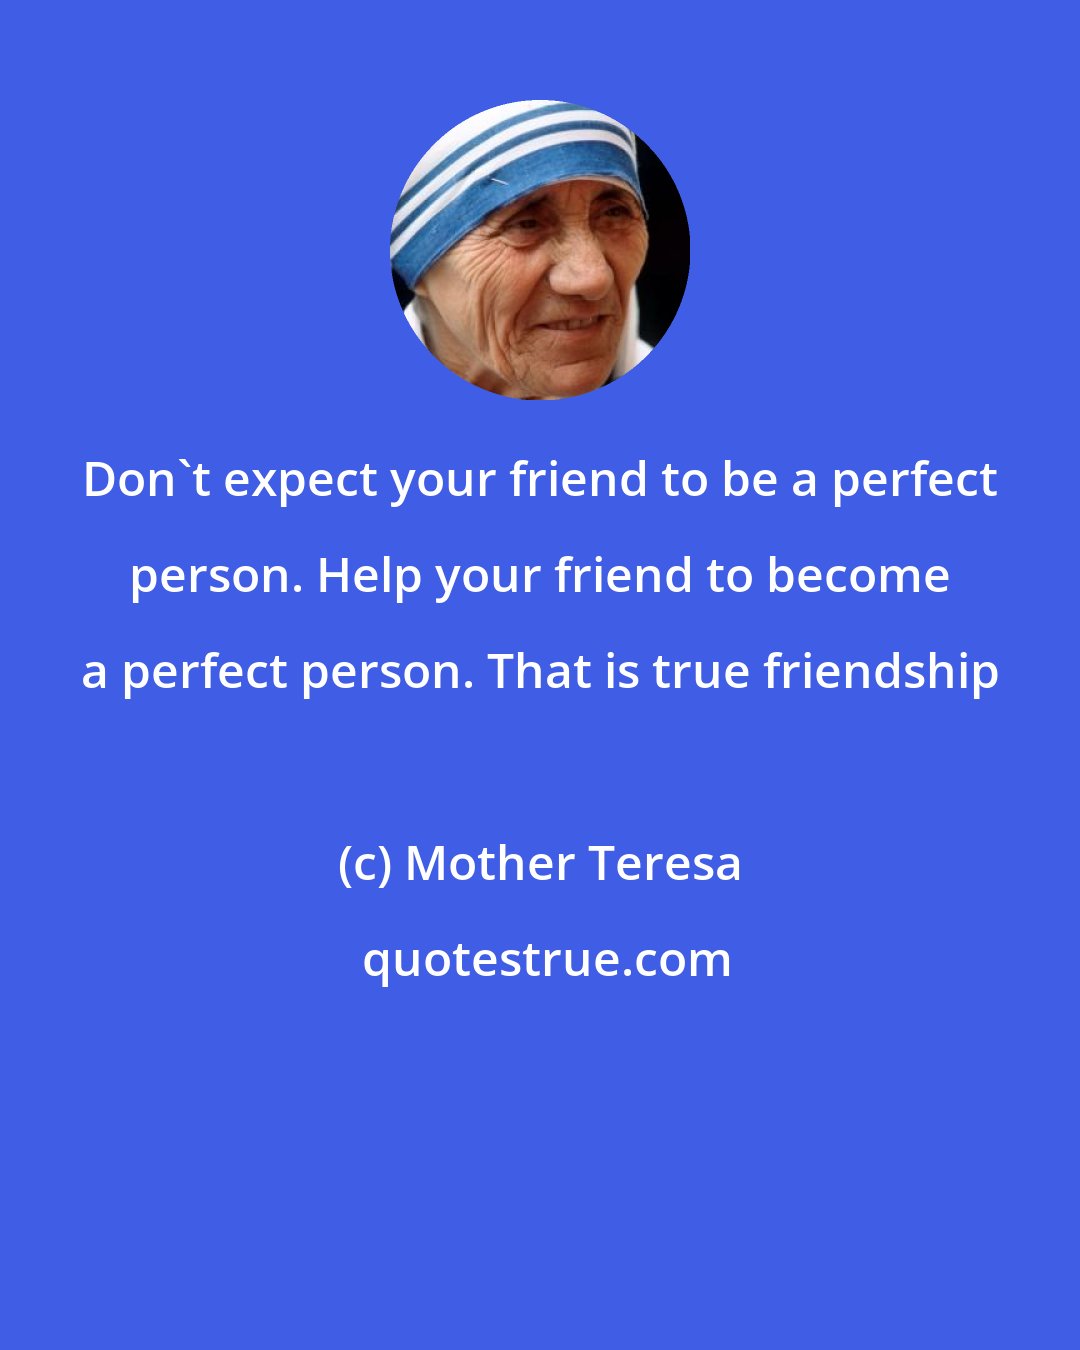 Mother Teresa: Don't expect your friend to be a perfect person. Help your friend to become a perfect person. That is true friendship